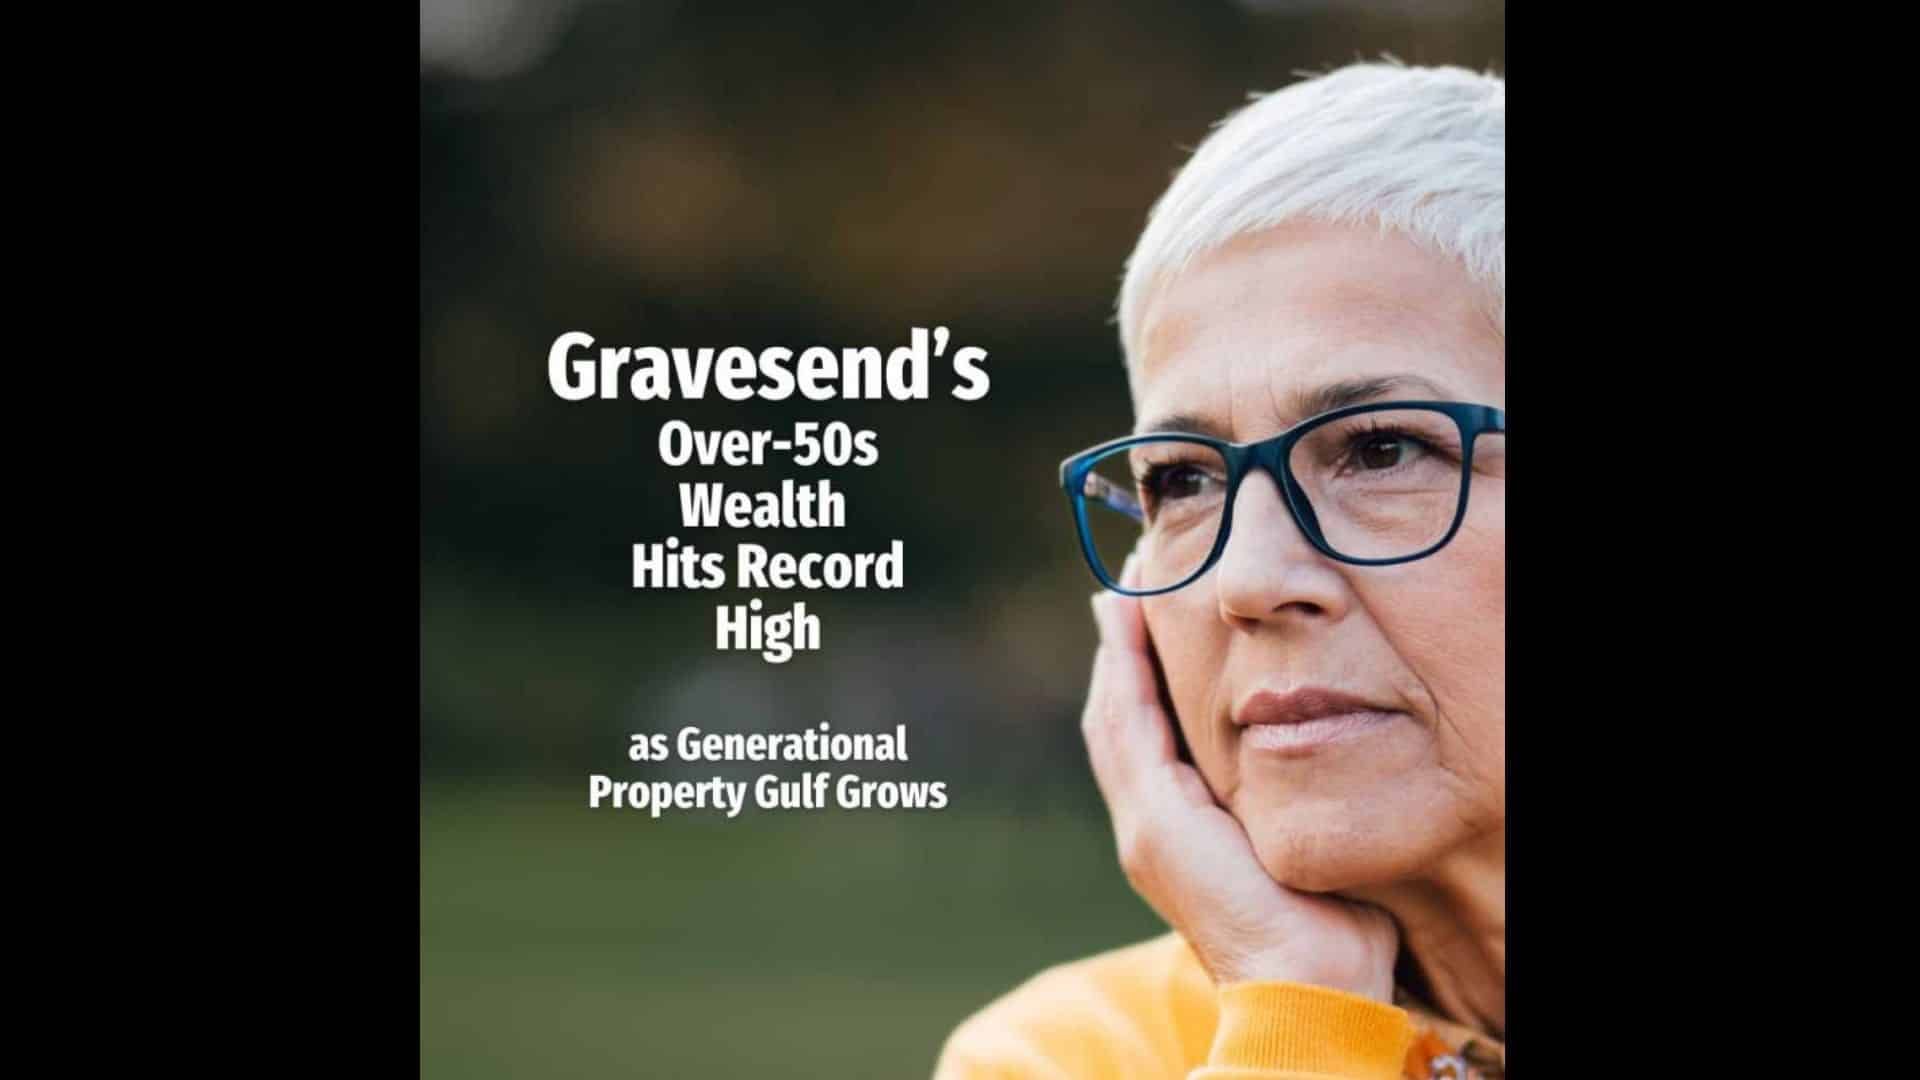 Gravesend’S Over-50s Wealth Hits Record High As Generational Property Gulf Grows